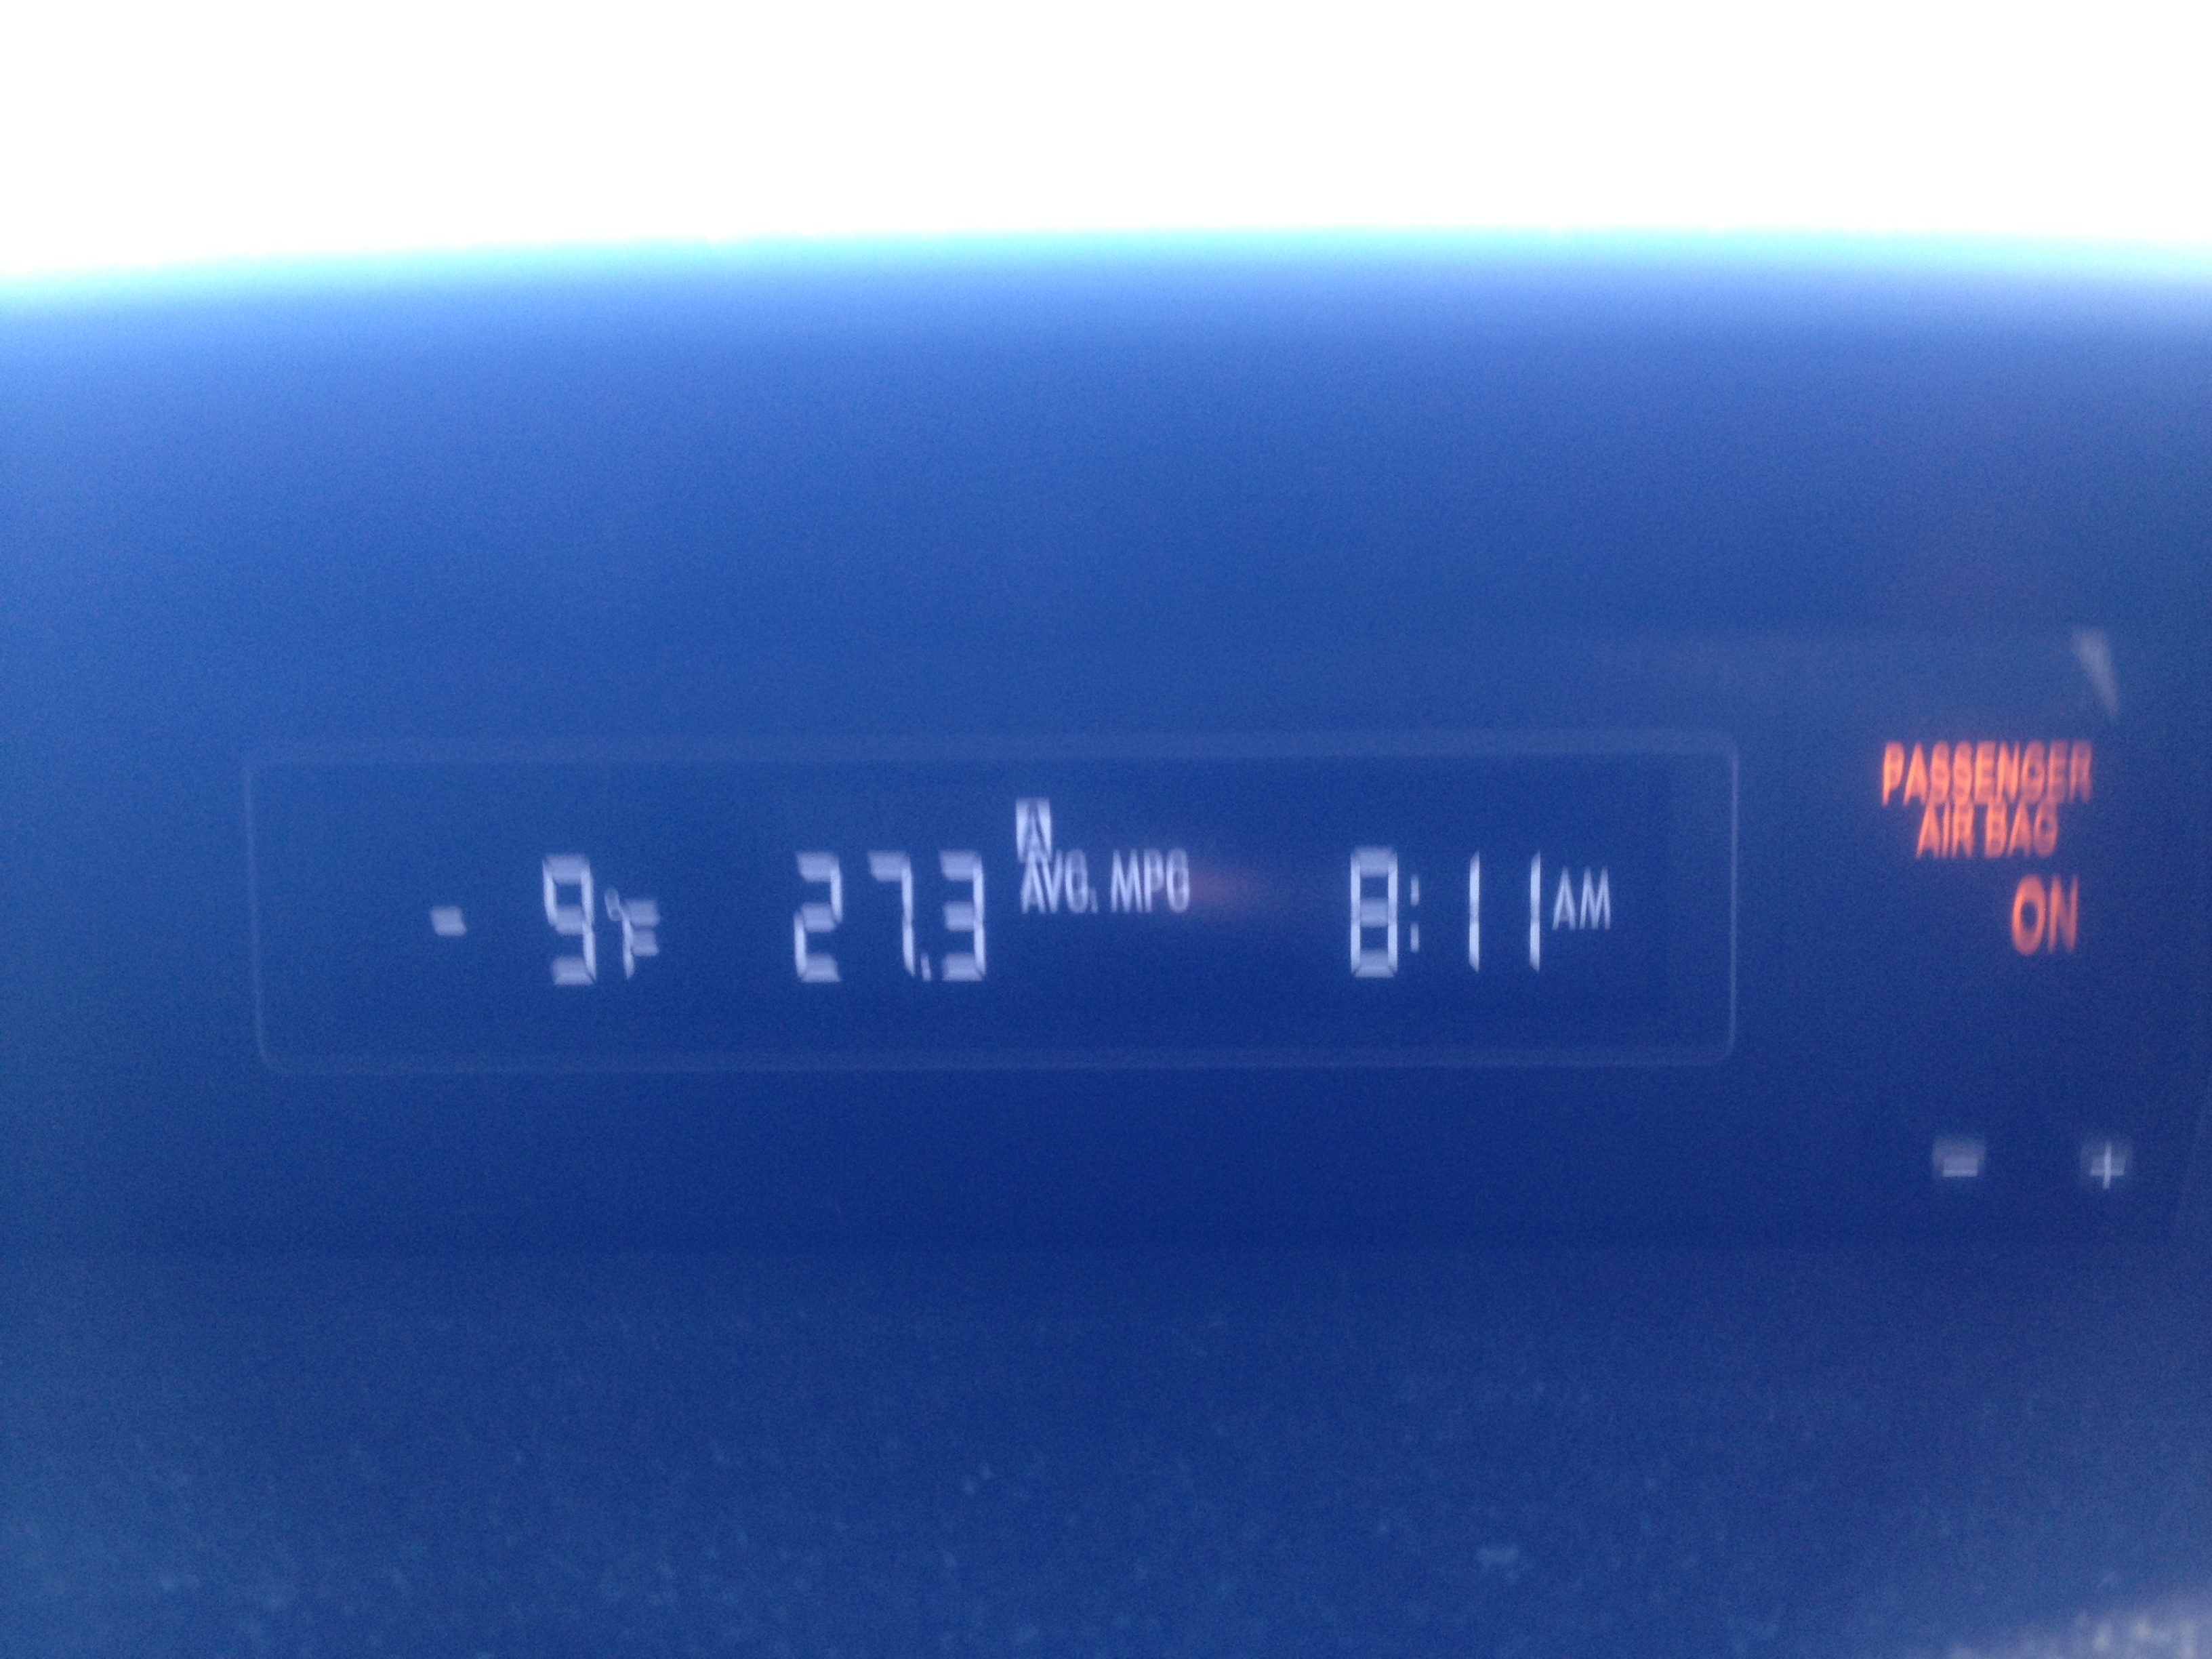 OMG it was so cold on the drive to Monarch!